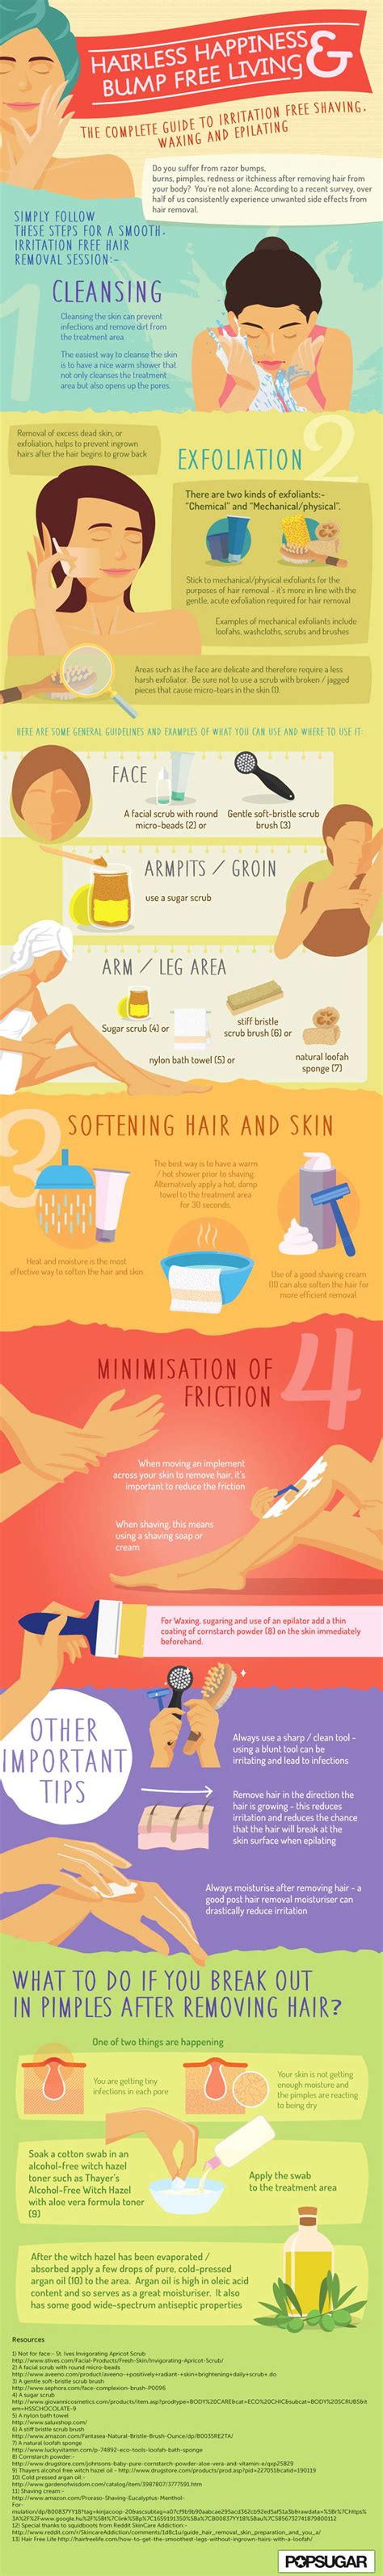 guide to irritation free shaving waxing and epilating [infographic]